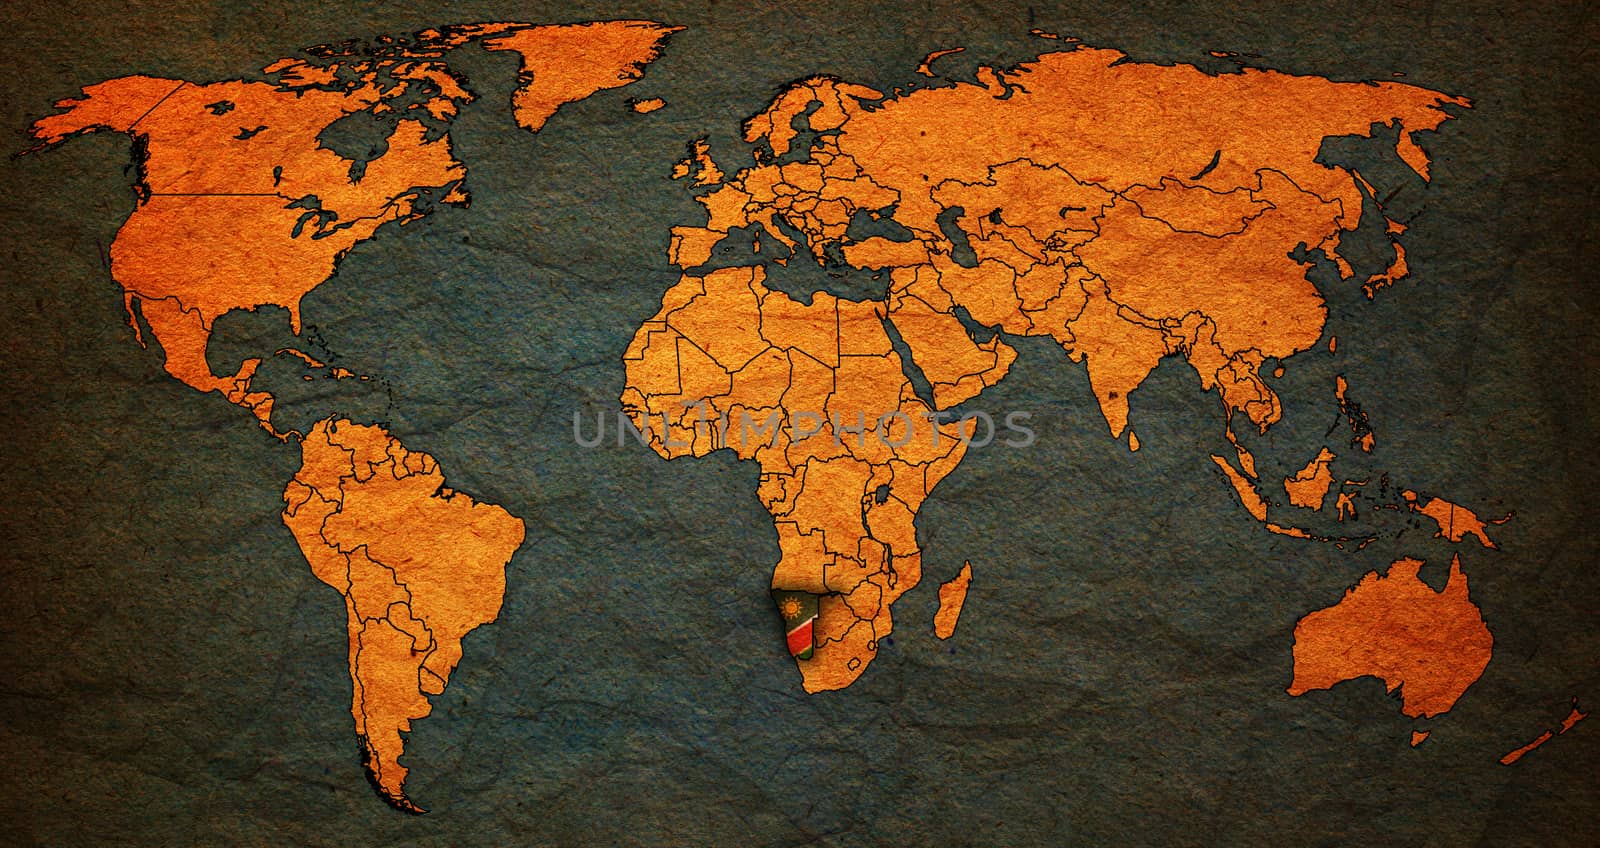 namibia flag on old vintage world map with national borders